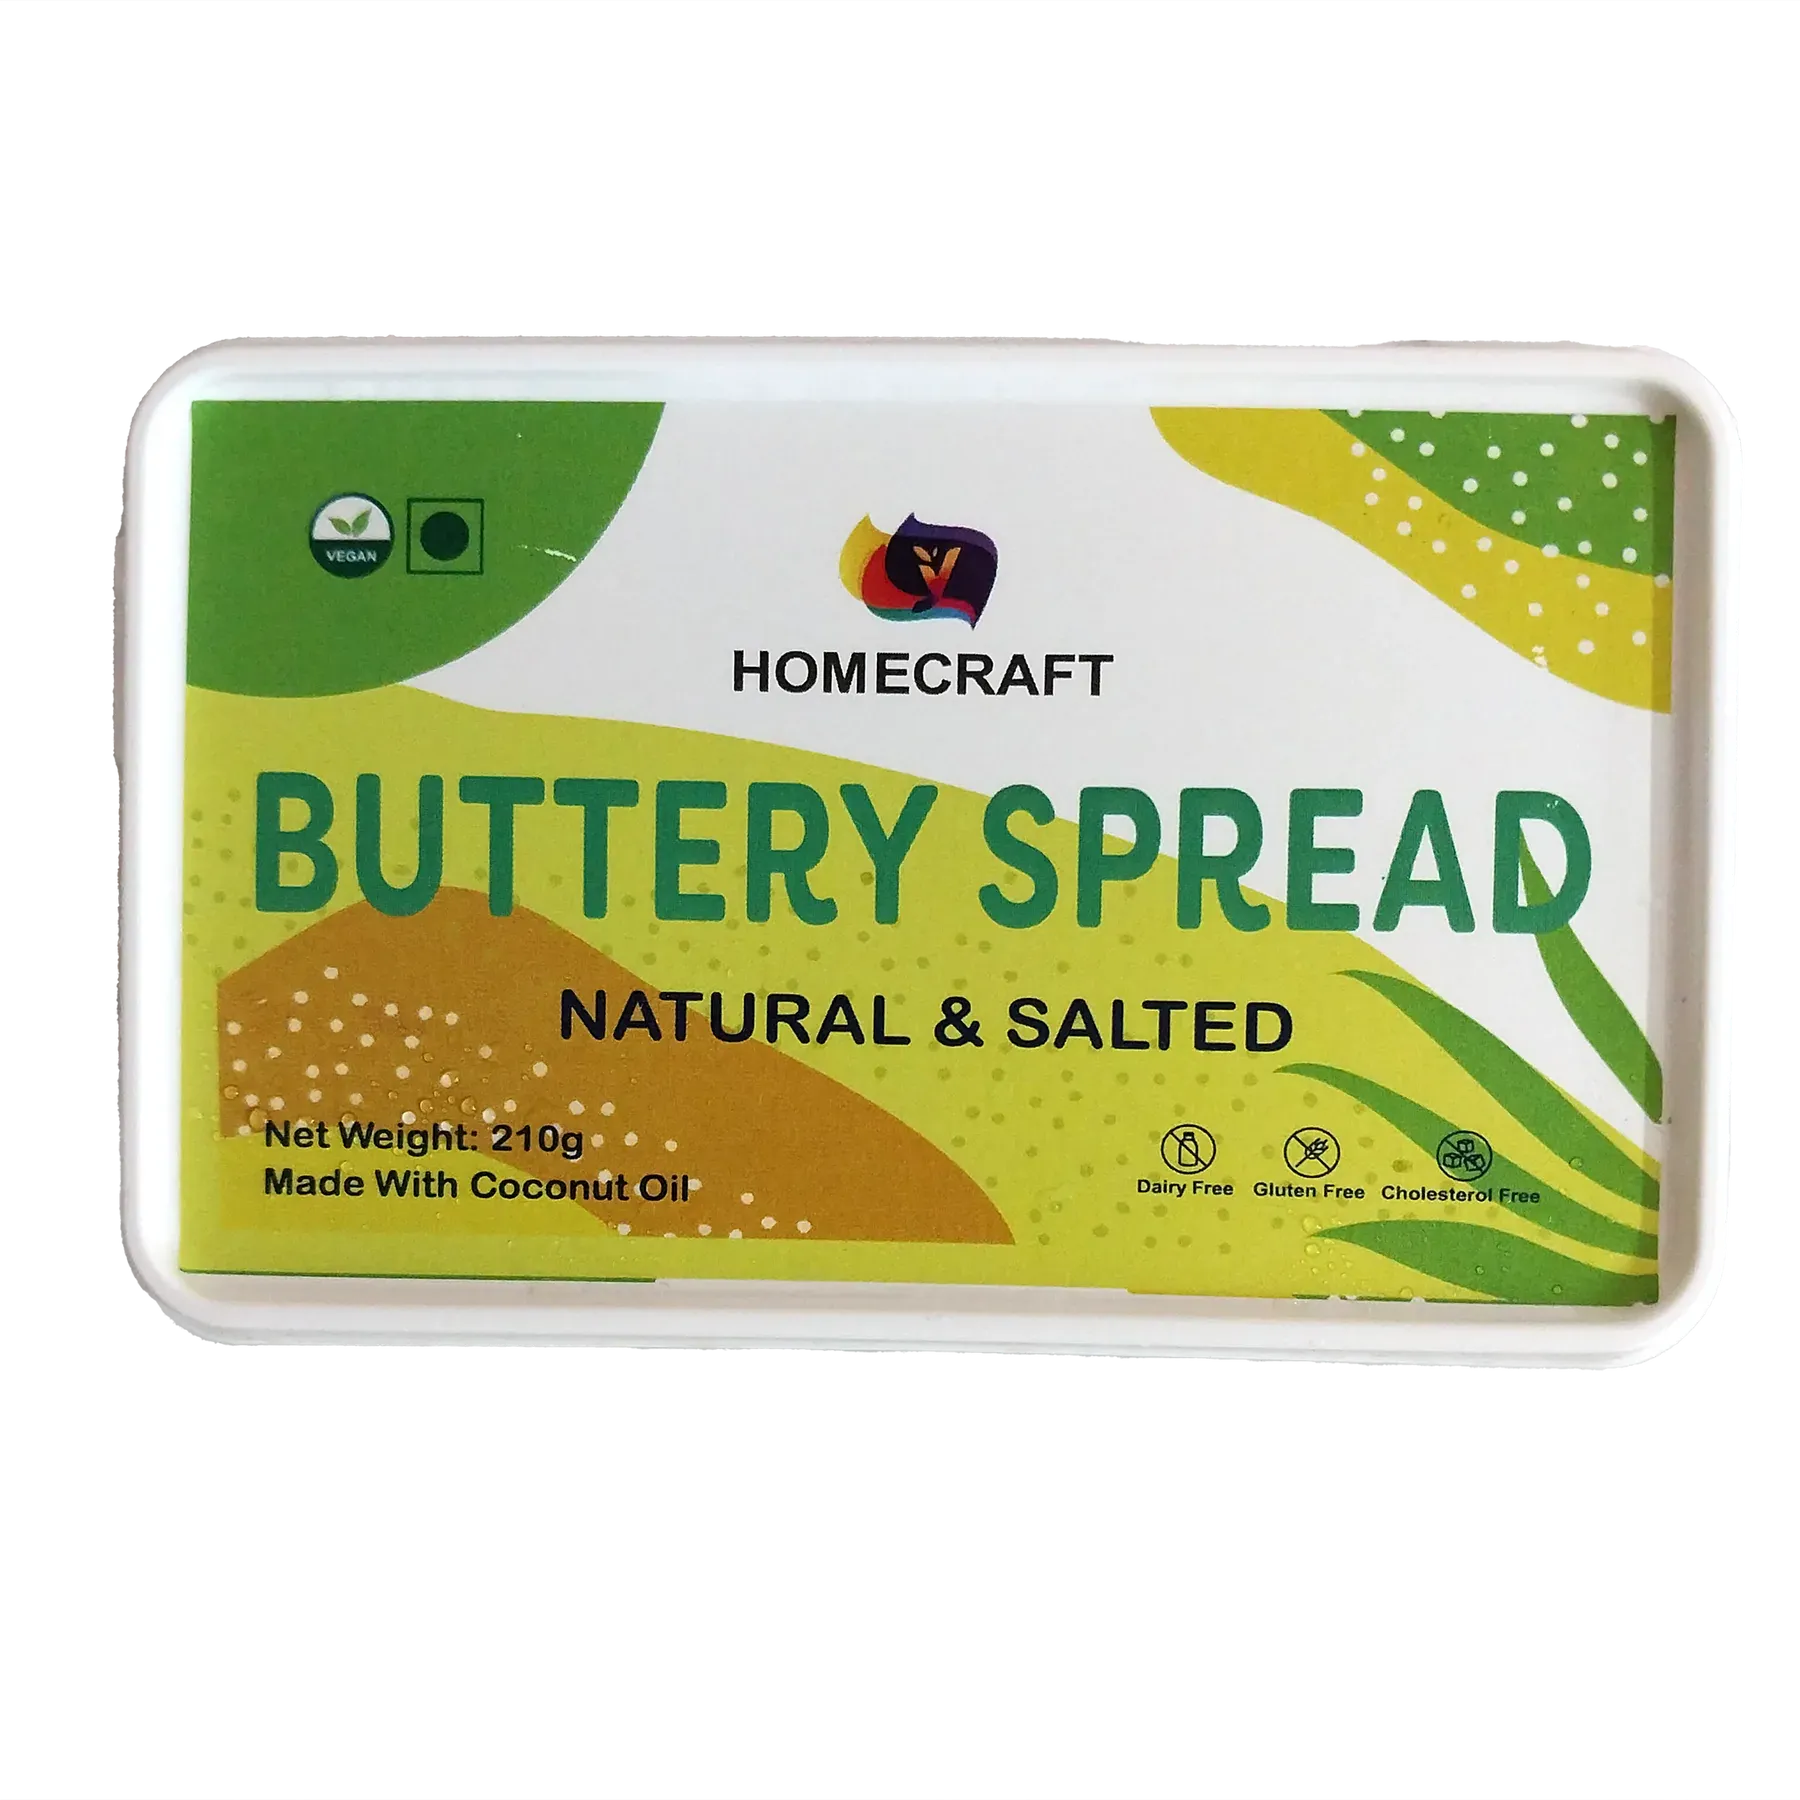 Homecraft Natural & Salted Buttery Spread Image